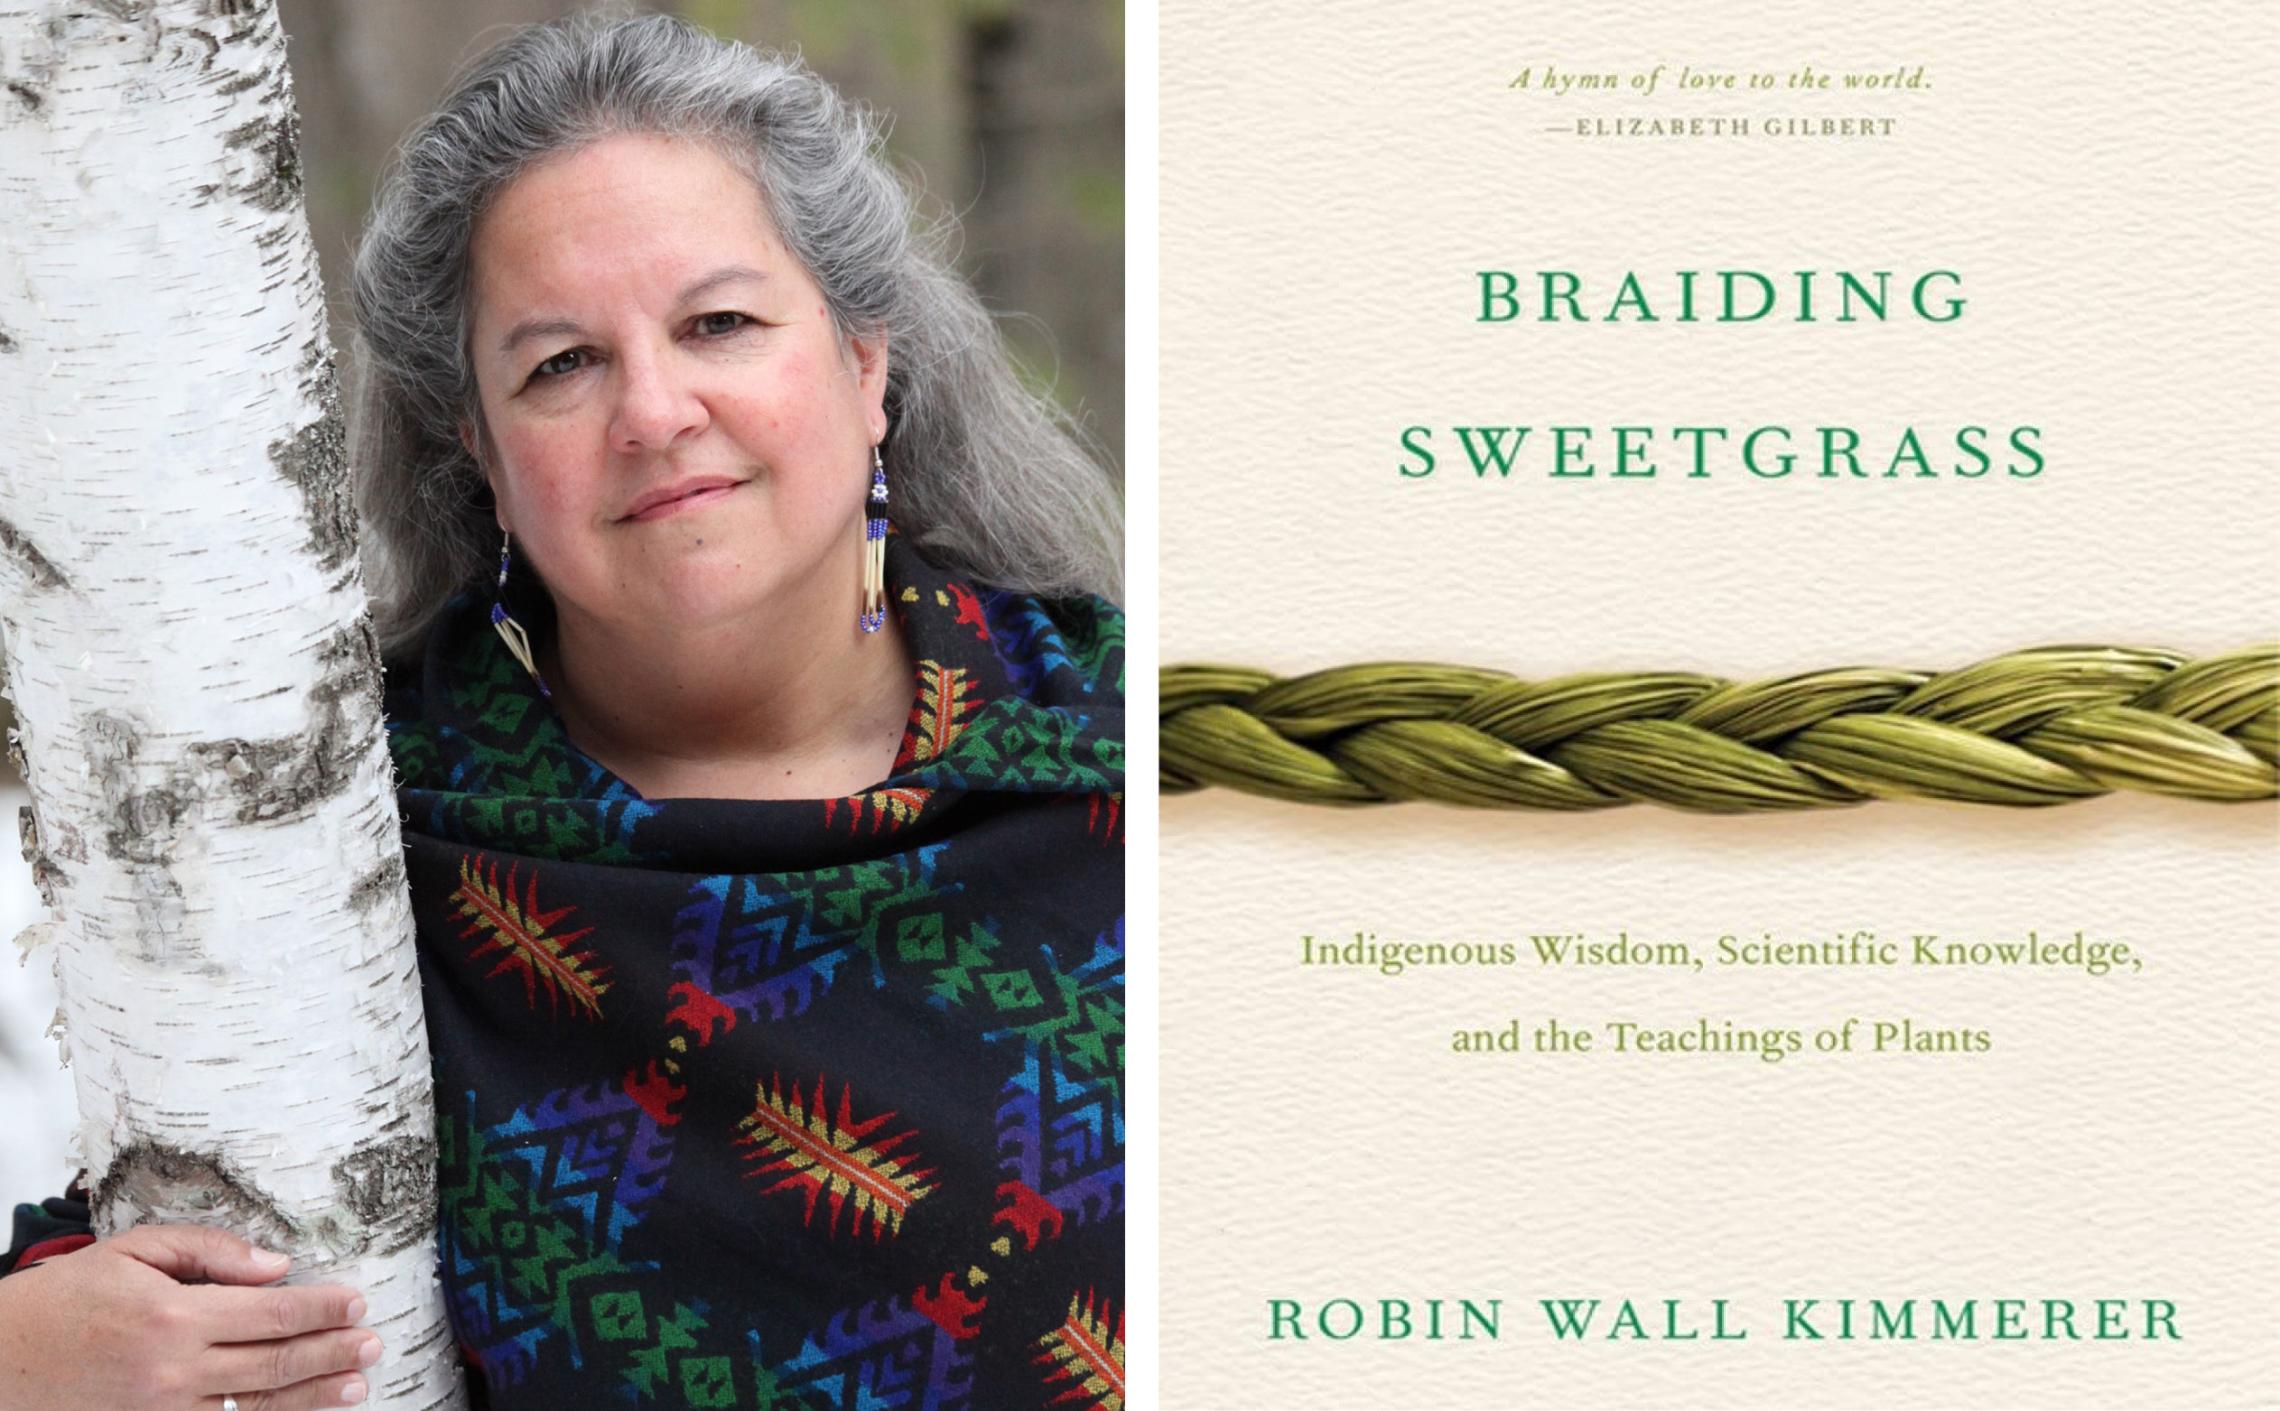 Robin Wall Kimmerer next to the book Braiding Sweetgrass